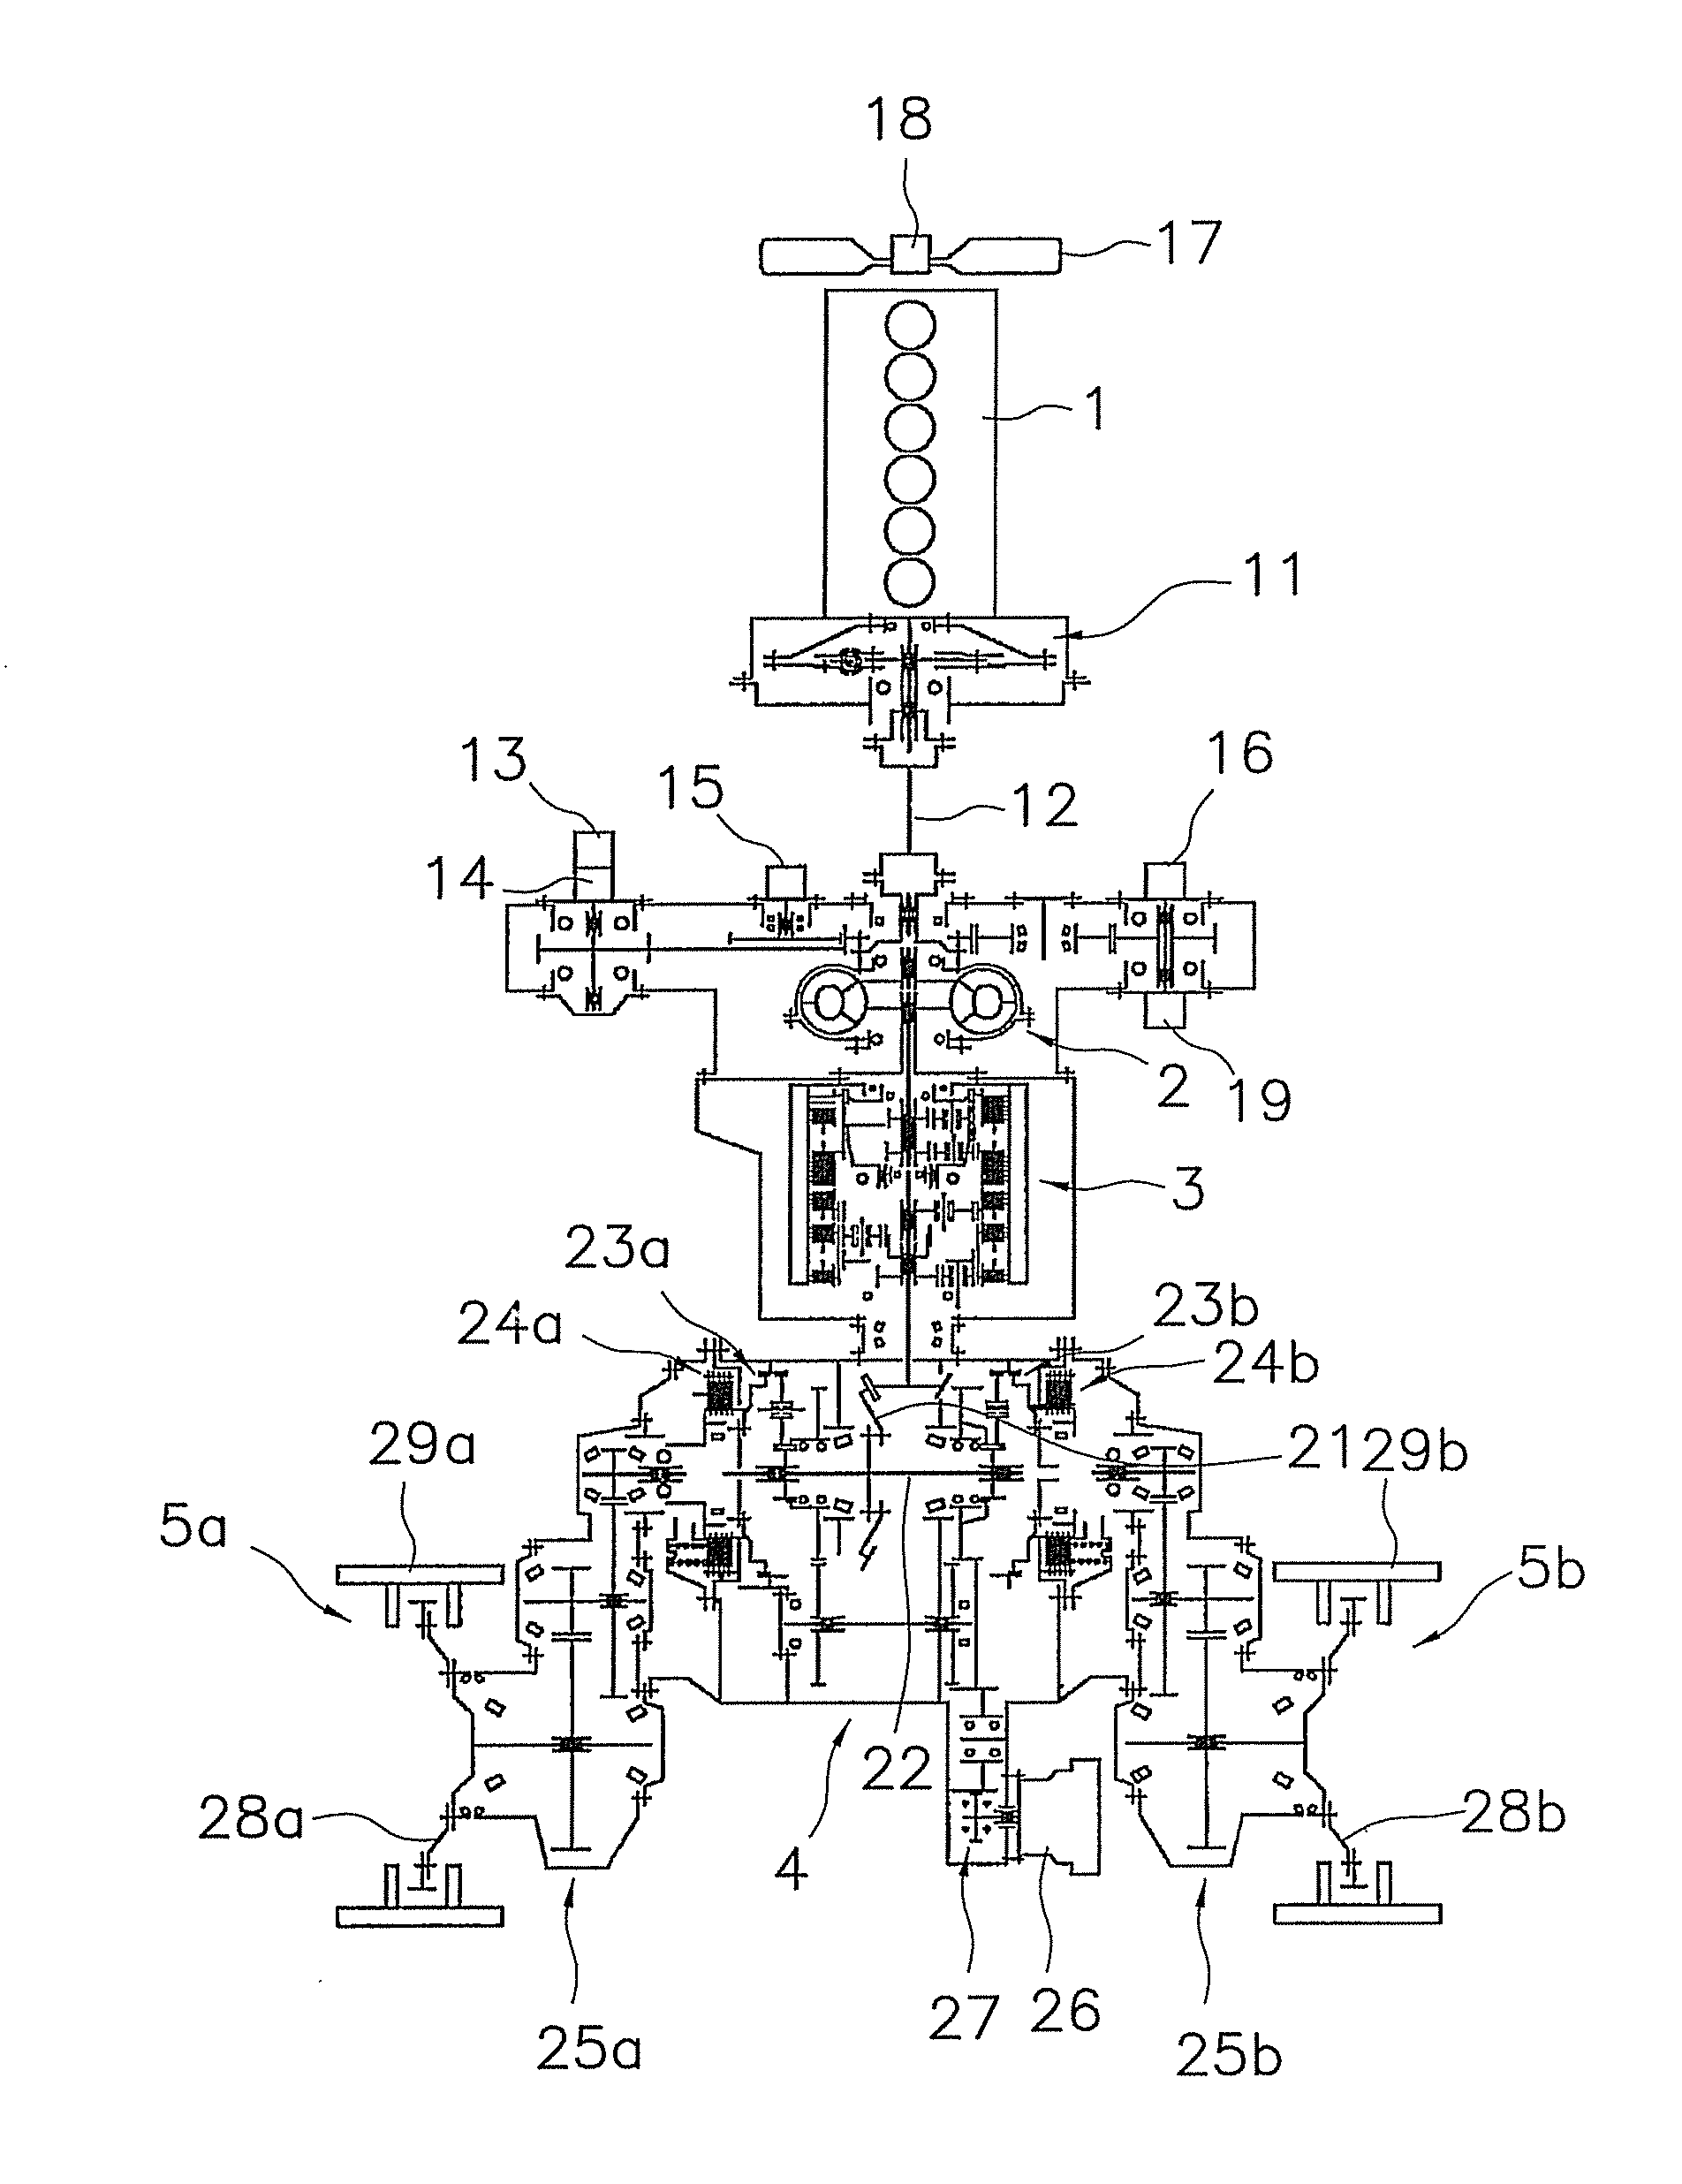 Hydraulic system for working vehicle